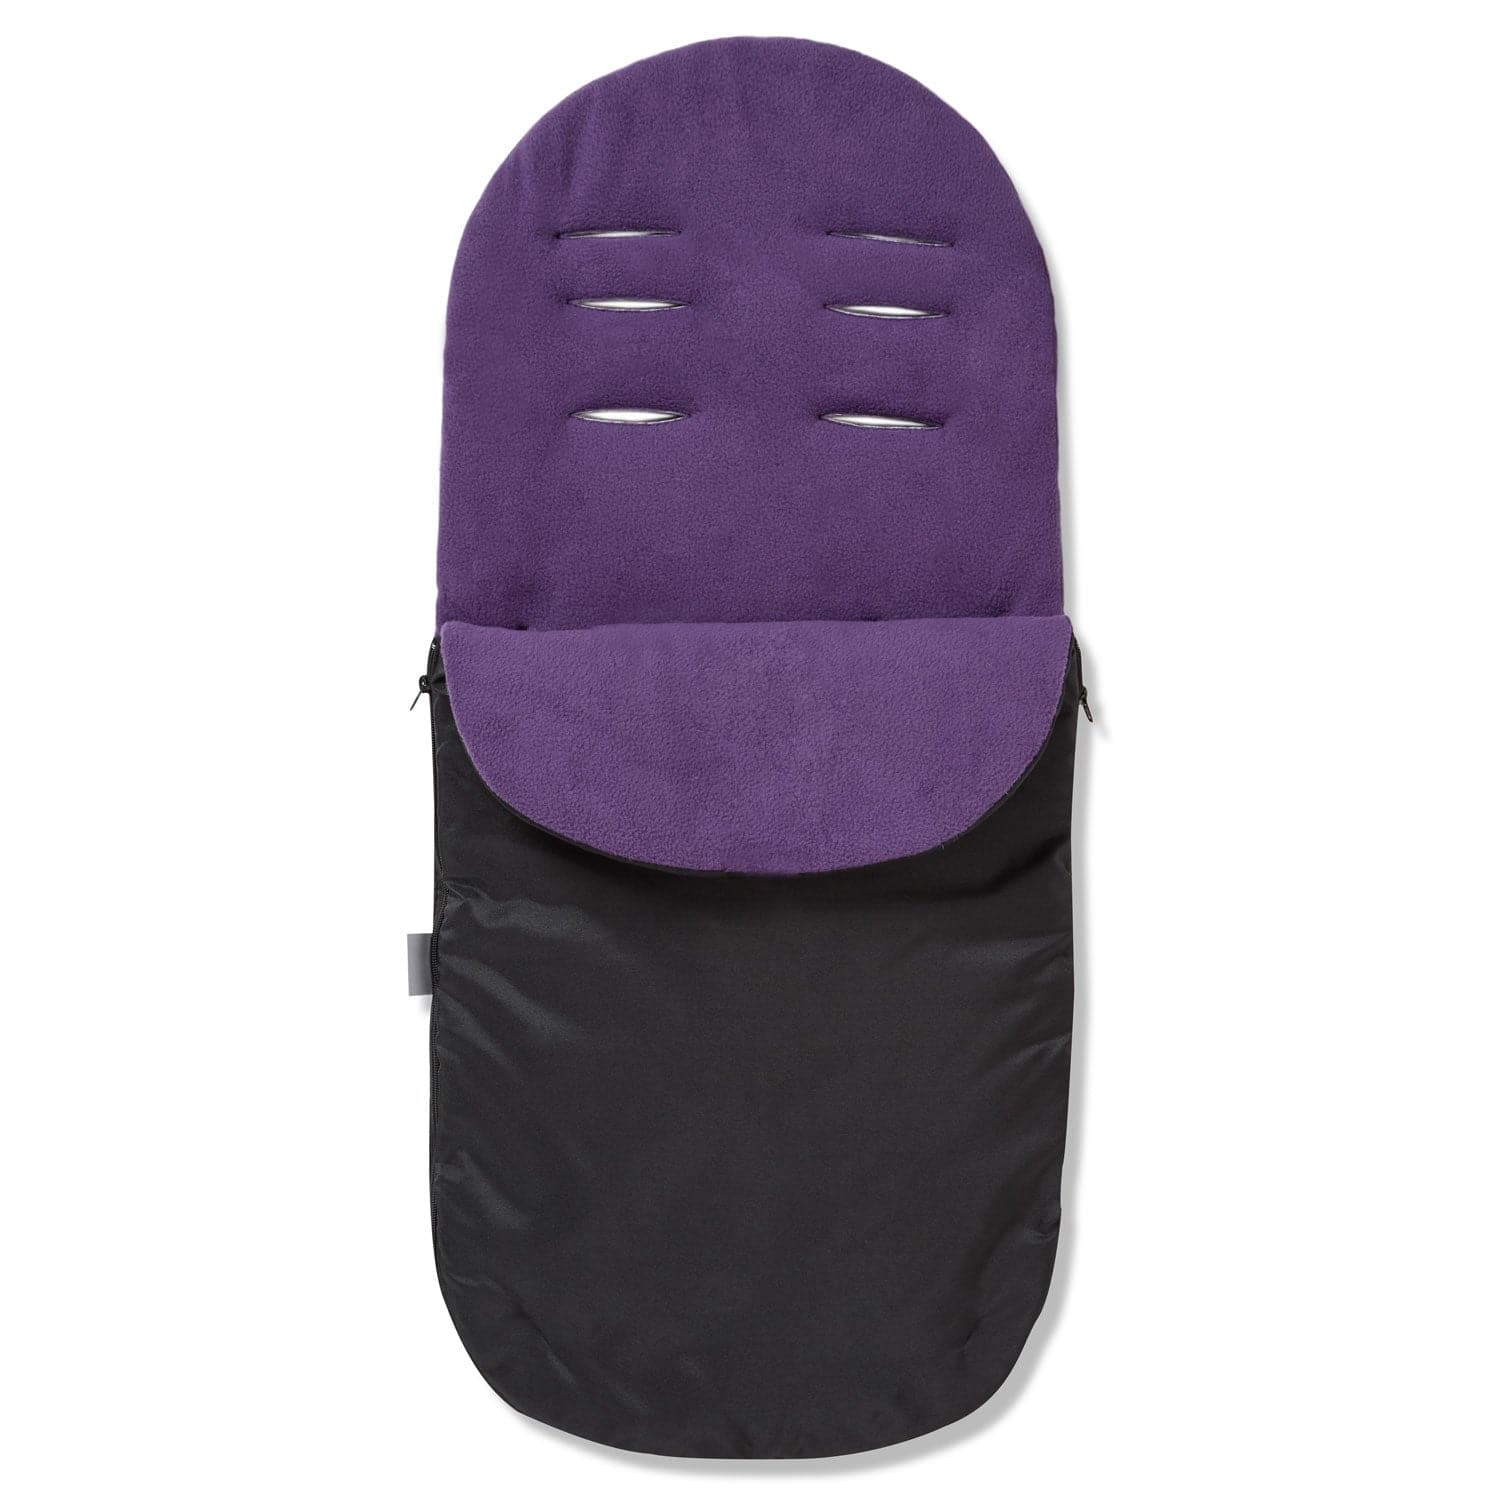 Footmuff / Cosy Toes Compatible with XTS - Purple / Fits All Models | For Your Little One